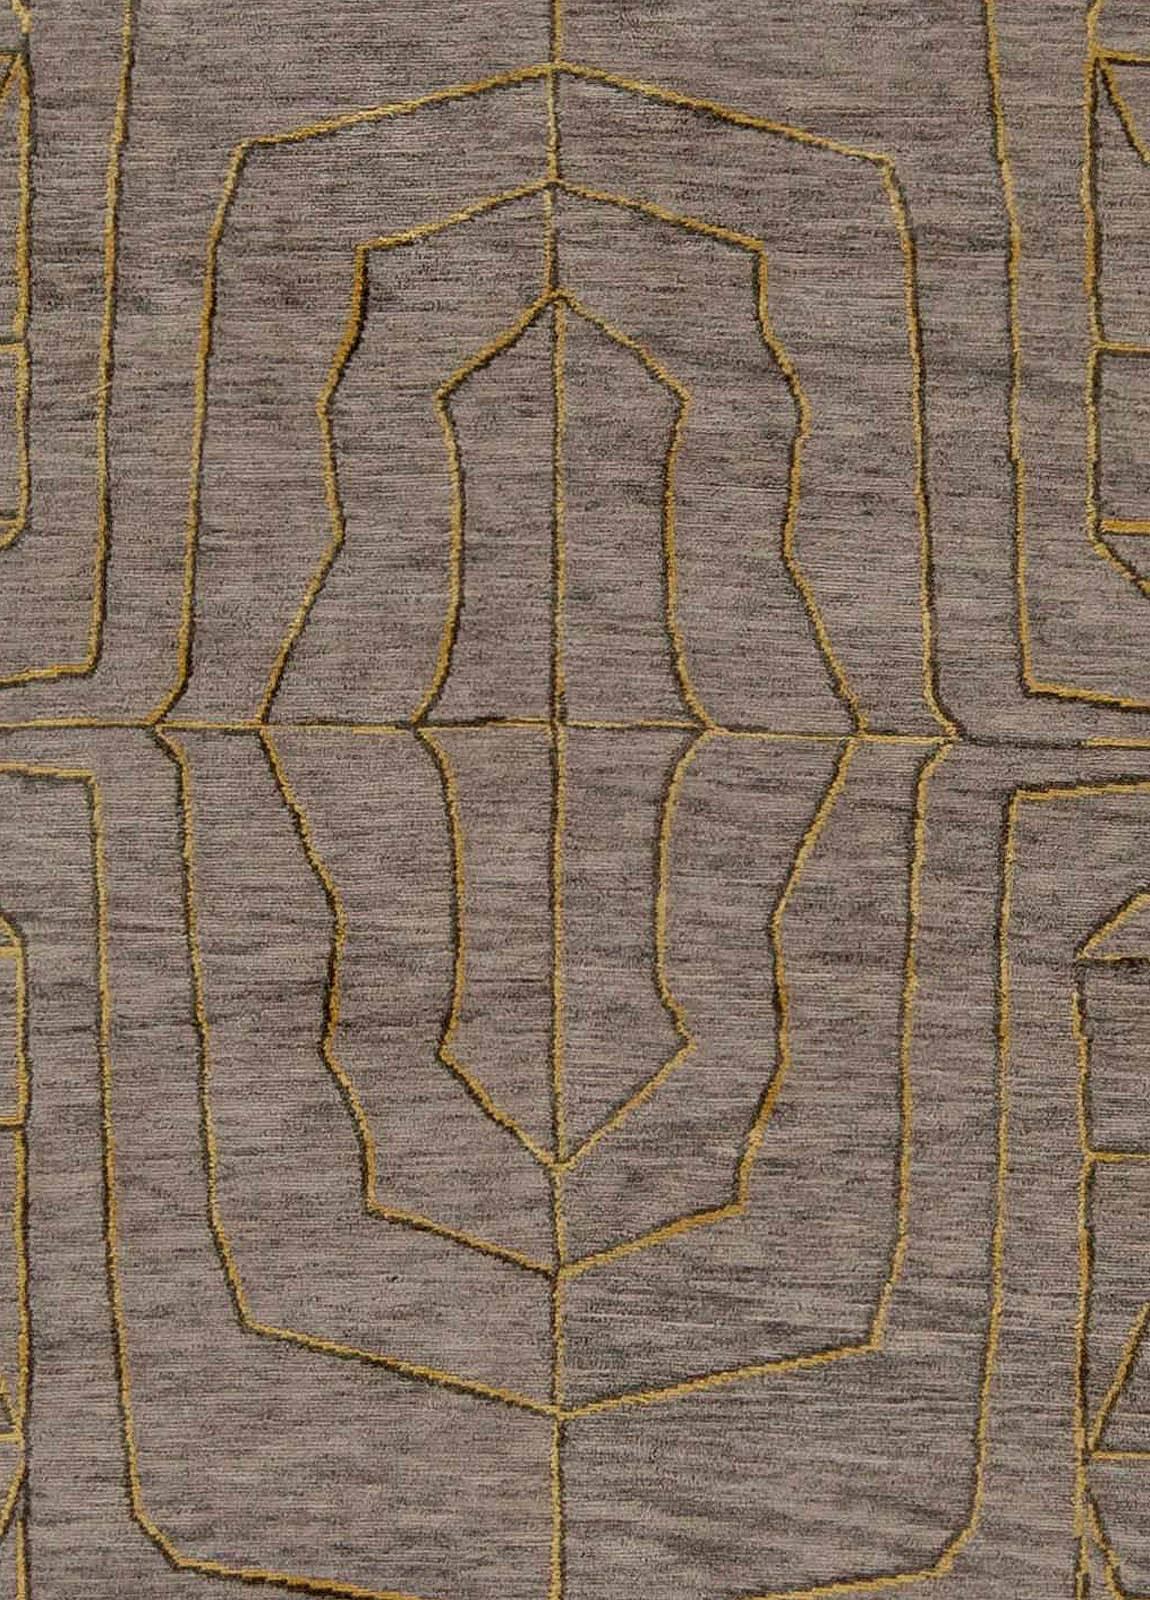 Contemporary hive grey and gold rug by Kim Alexandriuk for Doris Leslie Blau.
Size: 10'0